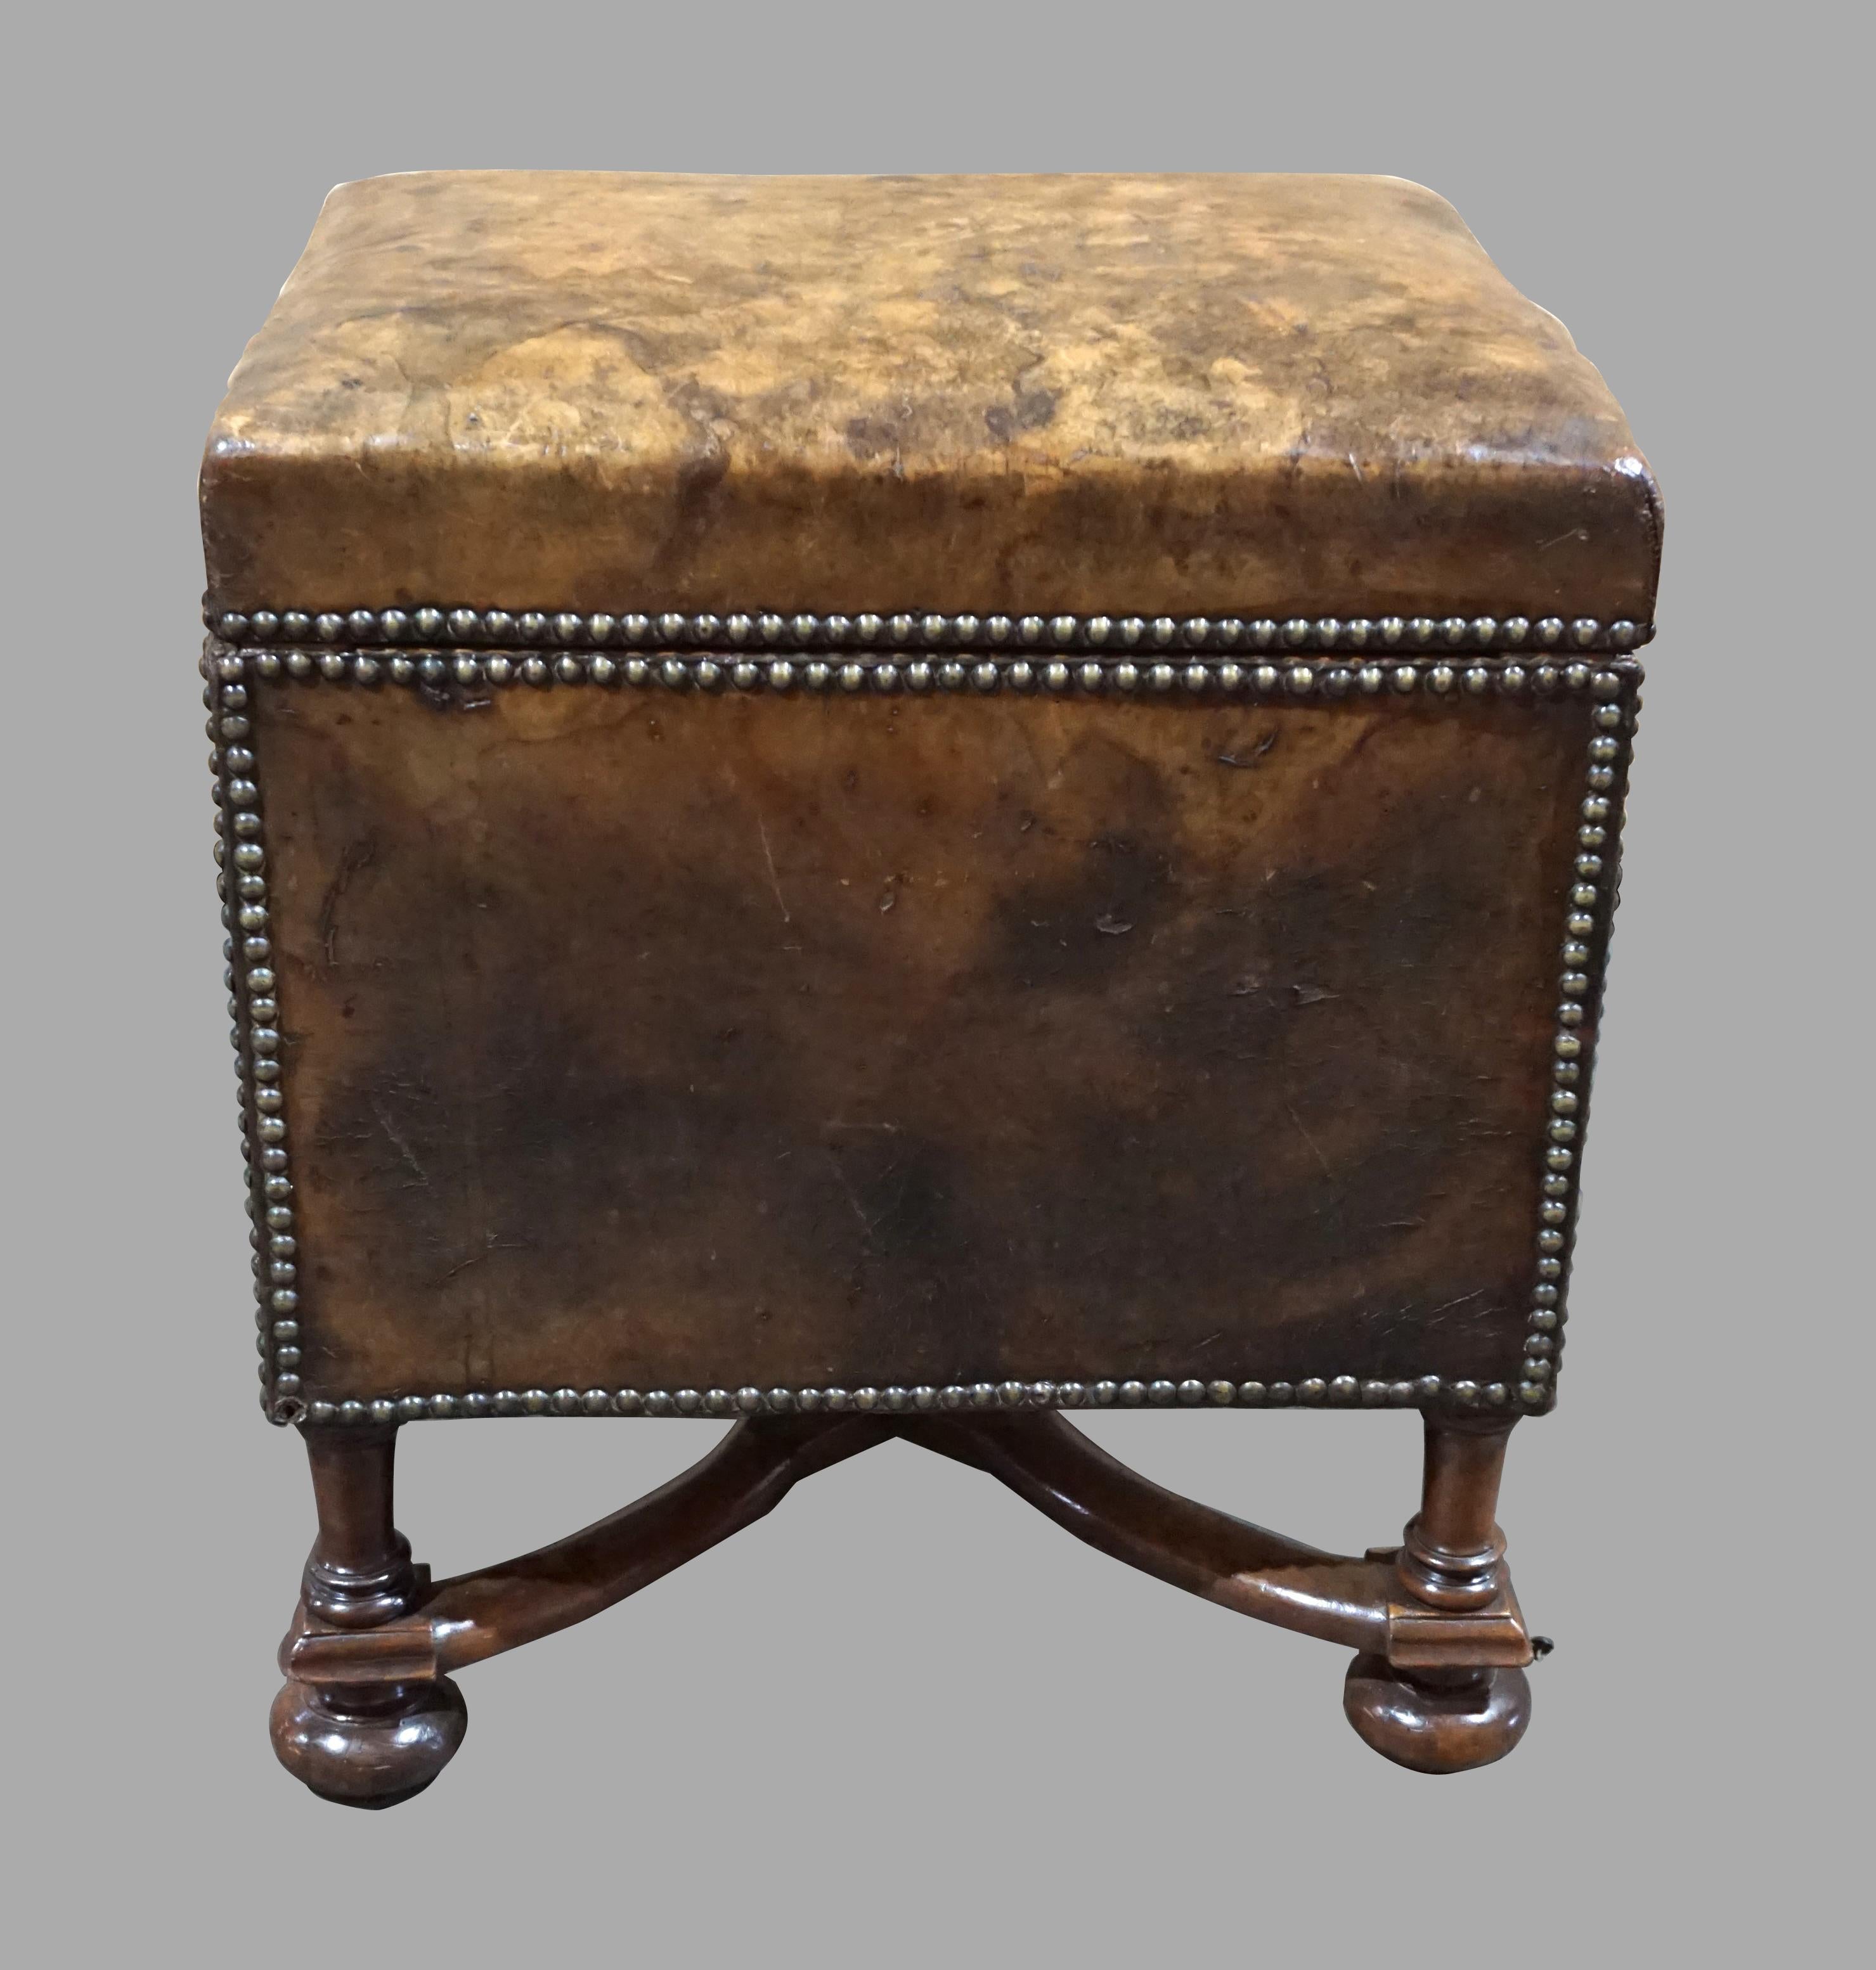 An unusual and charming walnut William and Mary style leather upholstered small trunk with nailhead trim, opening to reveal a wood lined interior, resting on a base with wavy stretcher ending in ball feet. Nineteenth century.